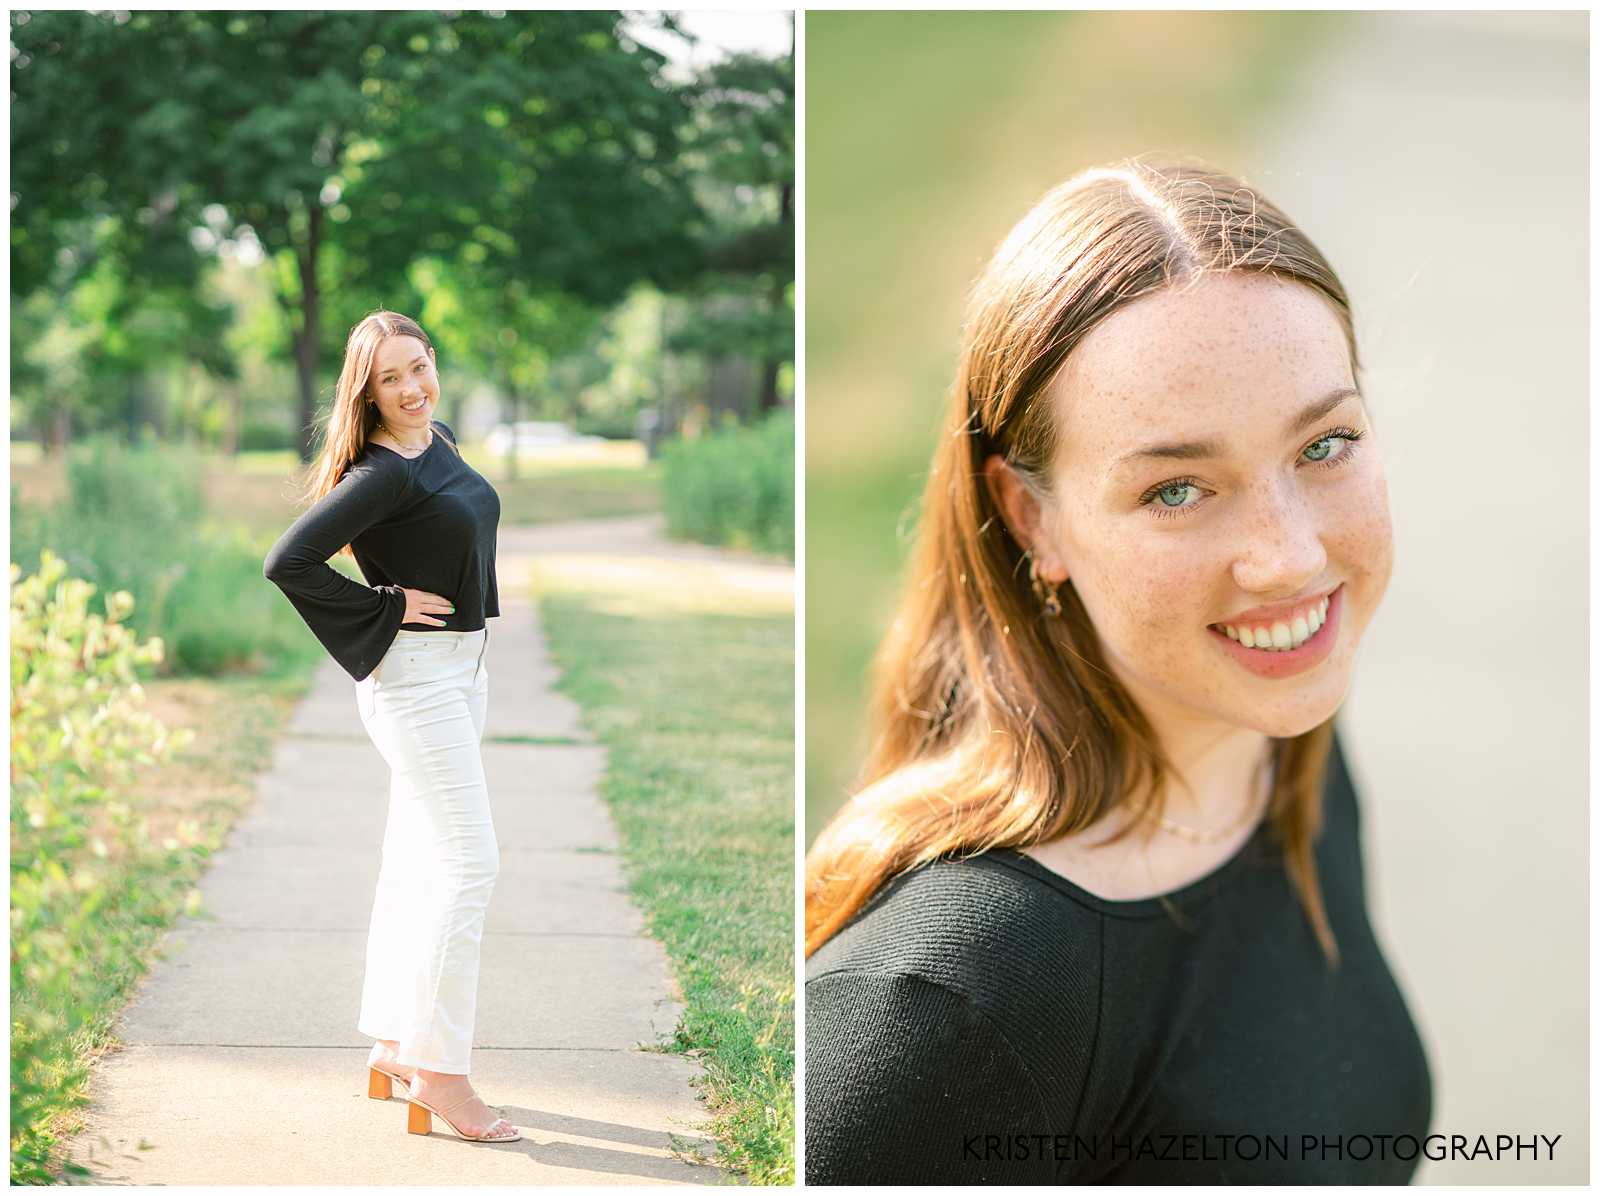 High school senior photos of a girl with freckles wearing a black shirt.